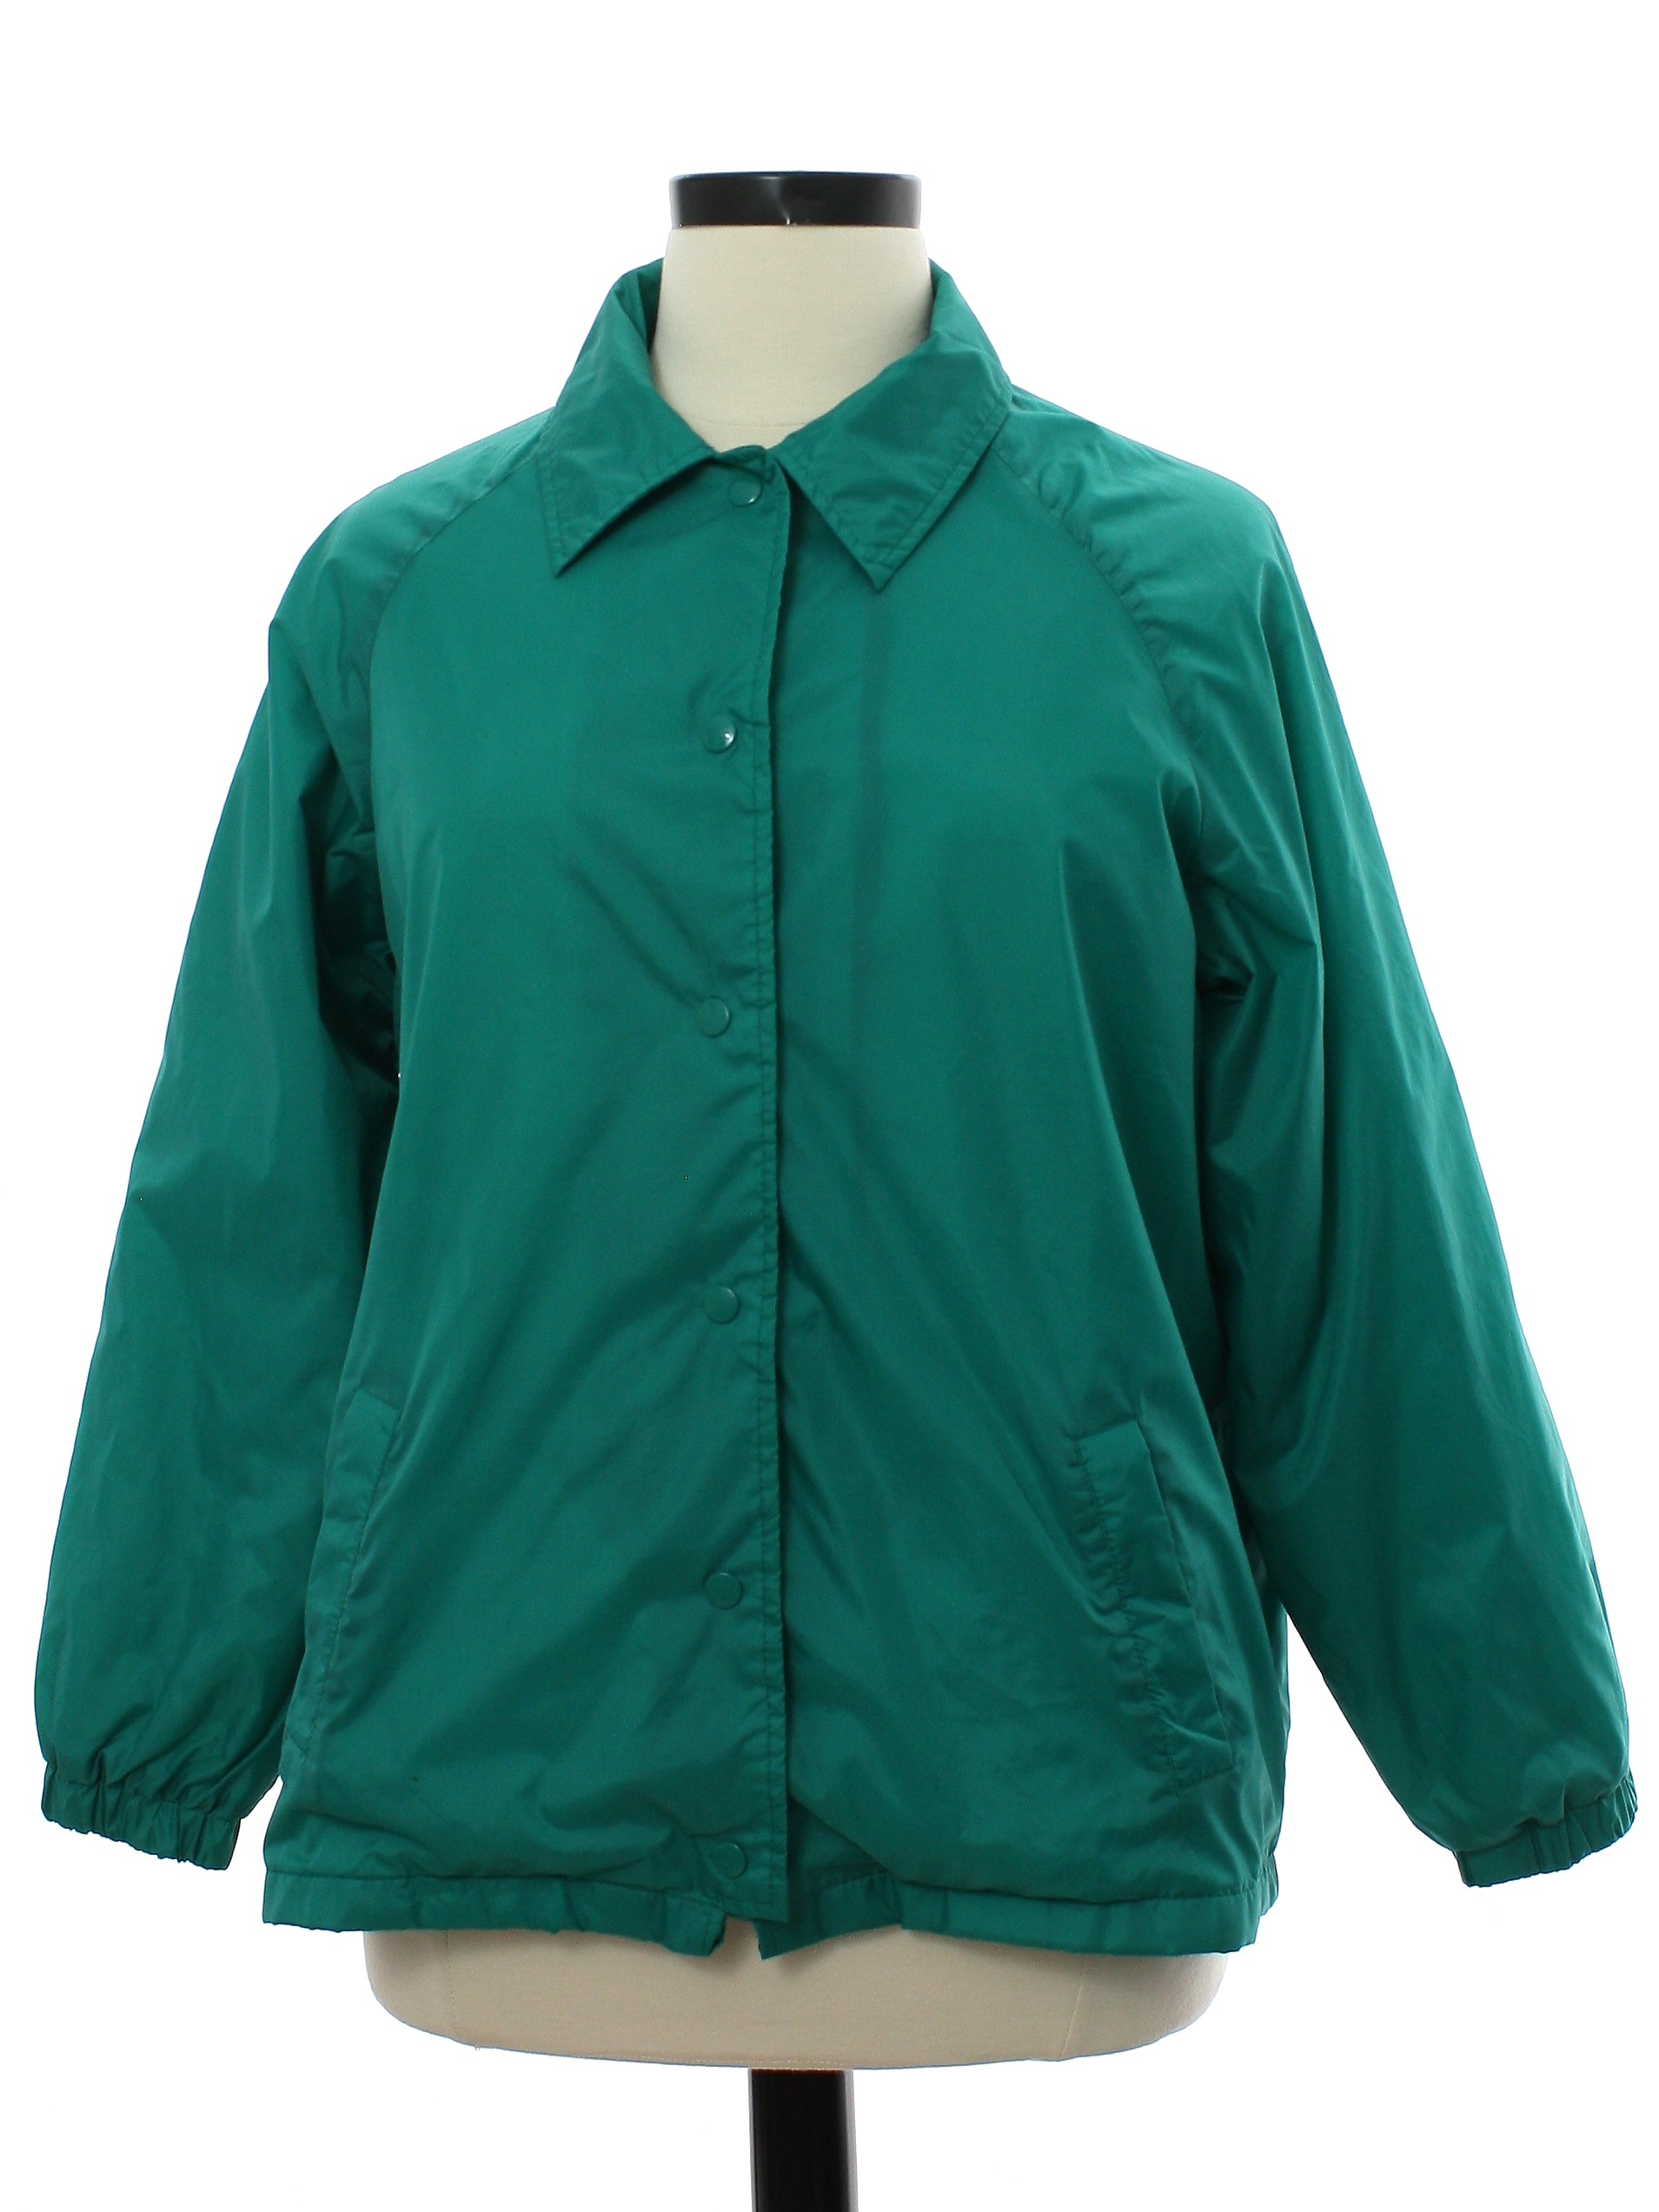 Retro 80s Jacket (Current Seer) : 80s -Current Seer- Womens green ...